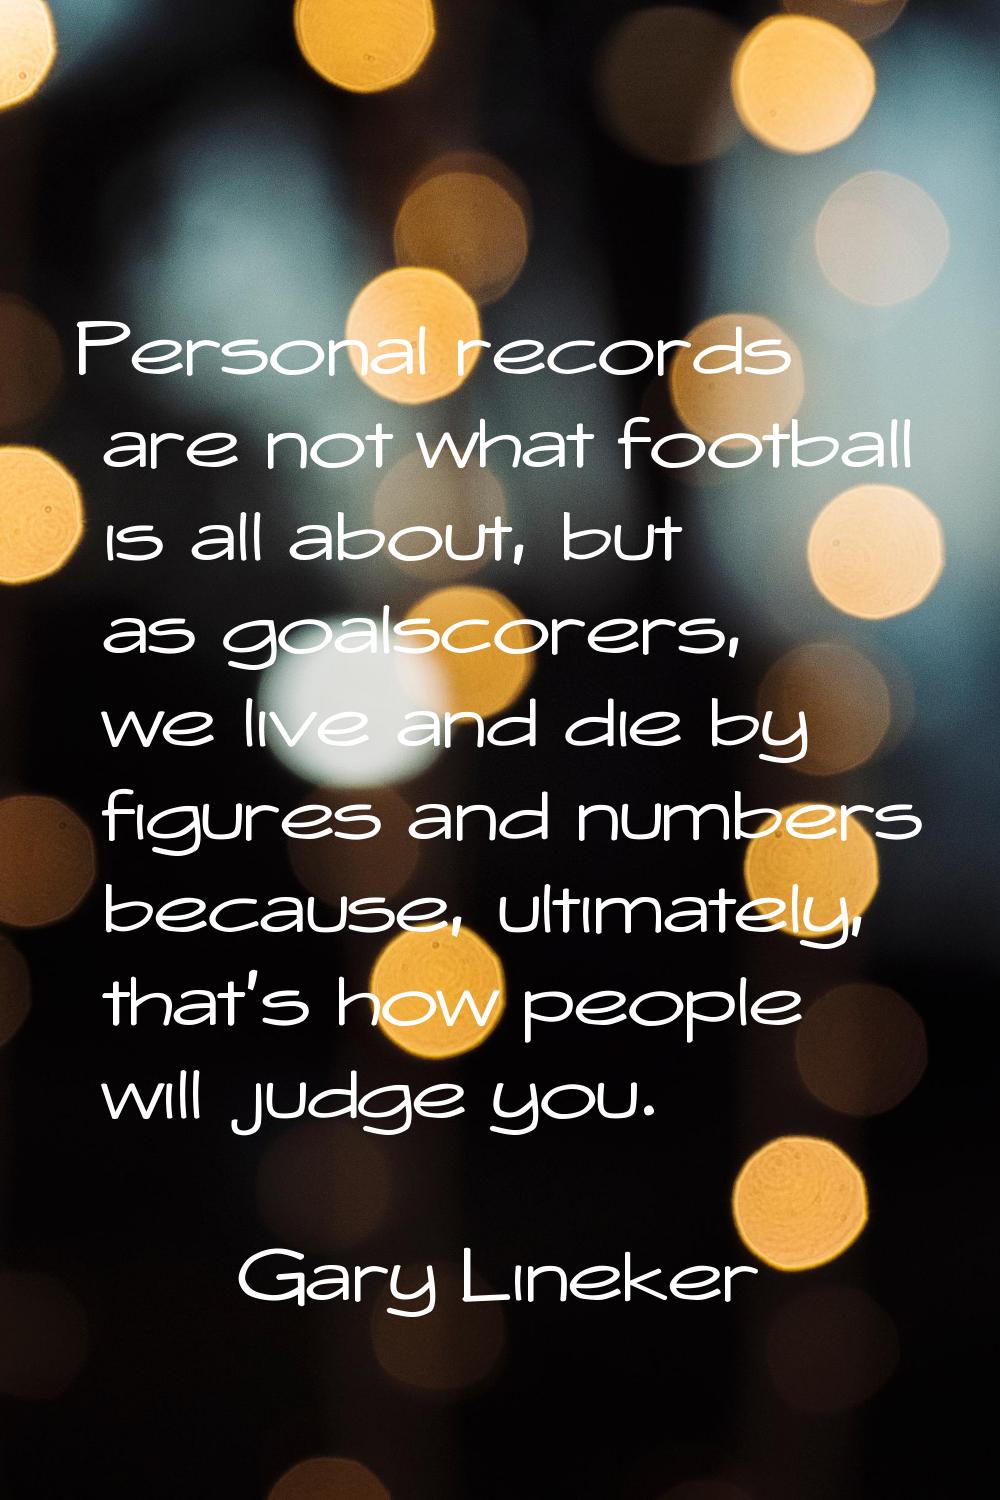 Personal records are not what football is all about, but as goalscorers, we live and die by figures